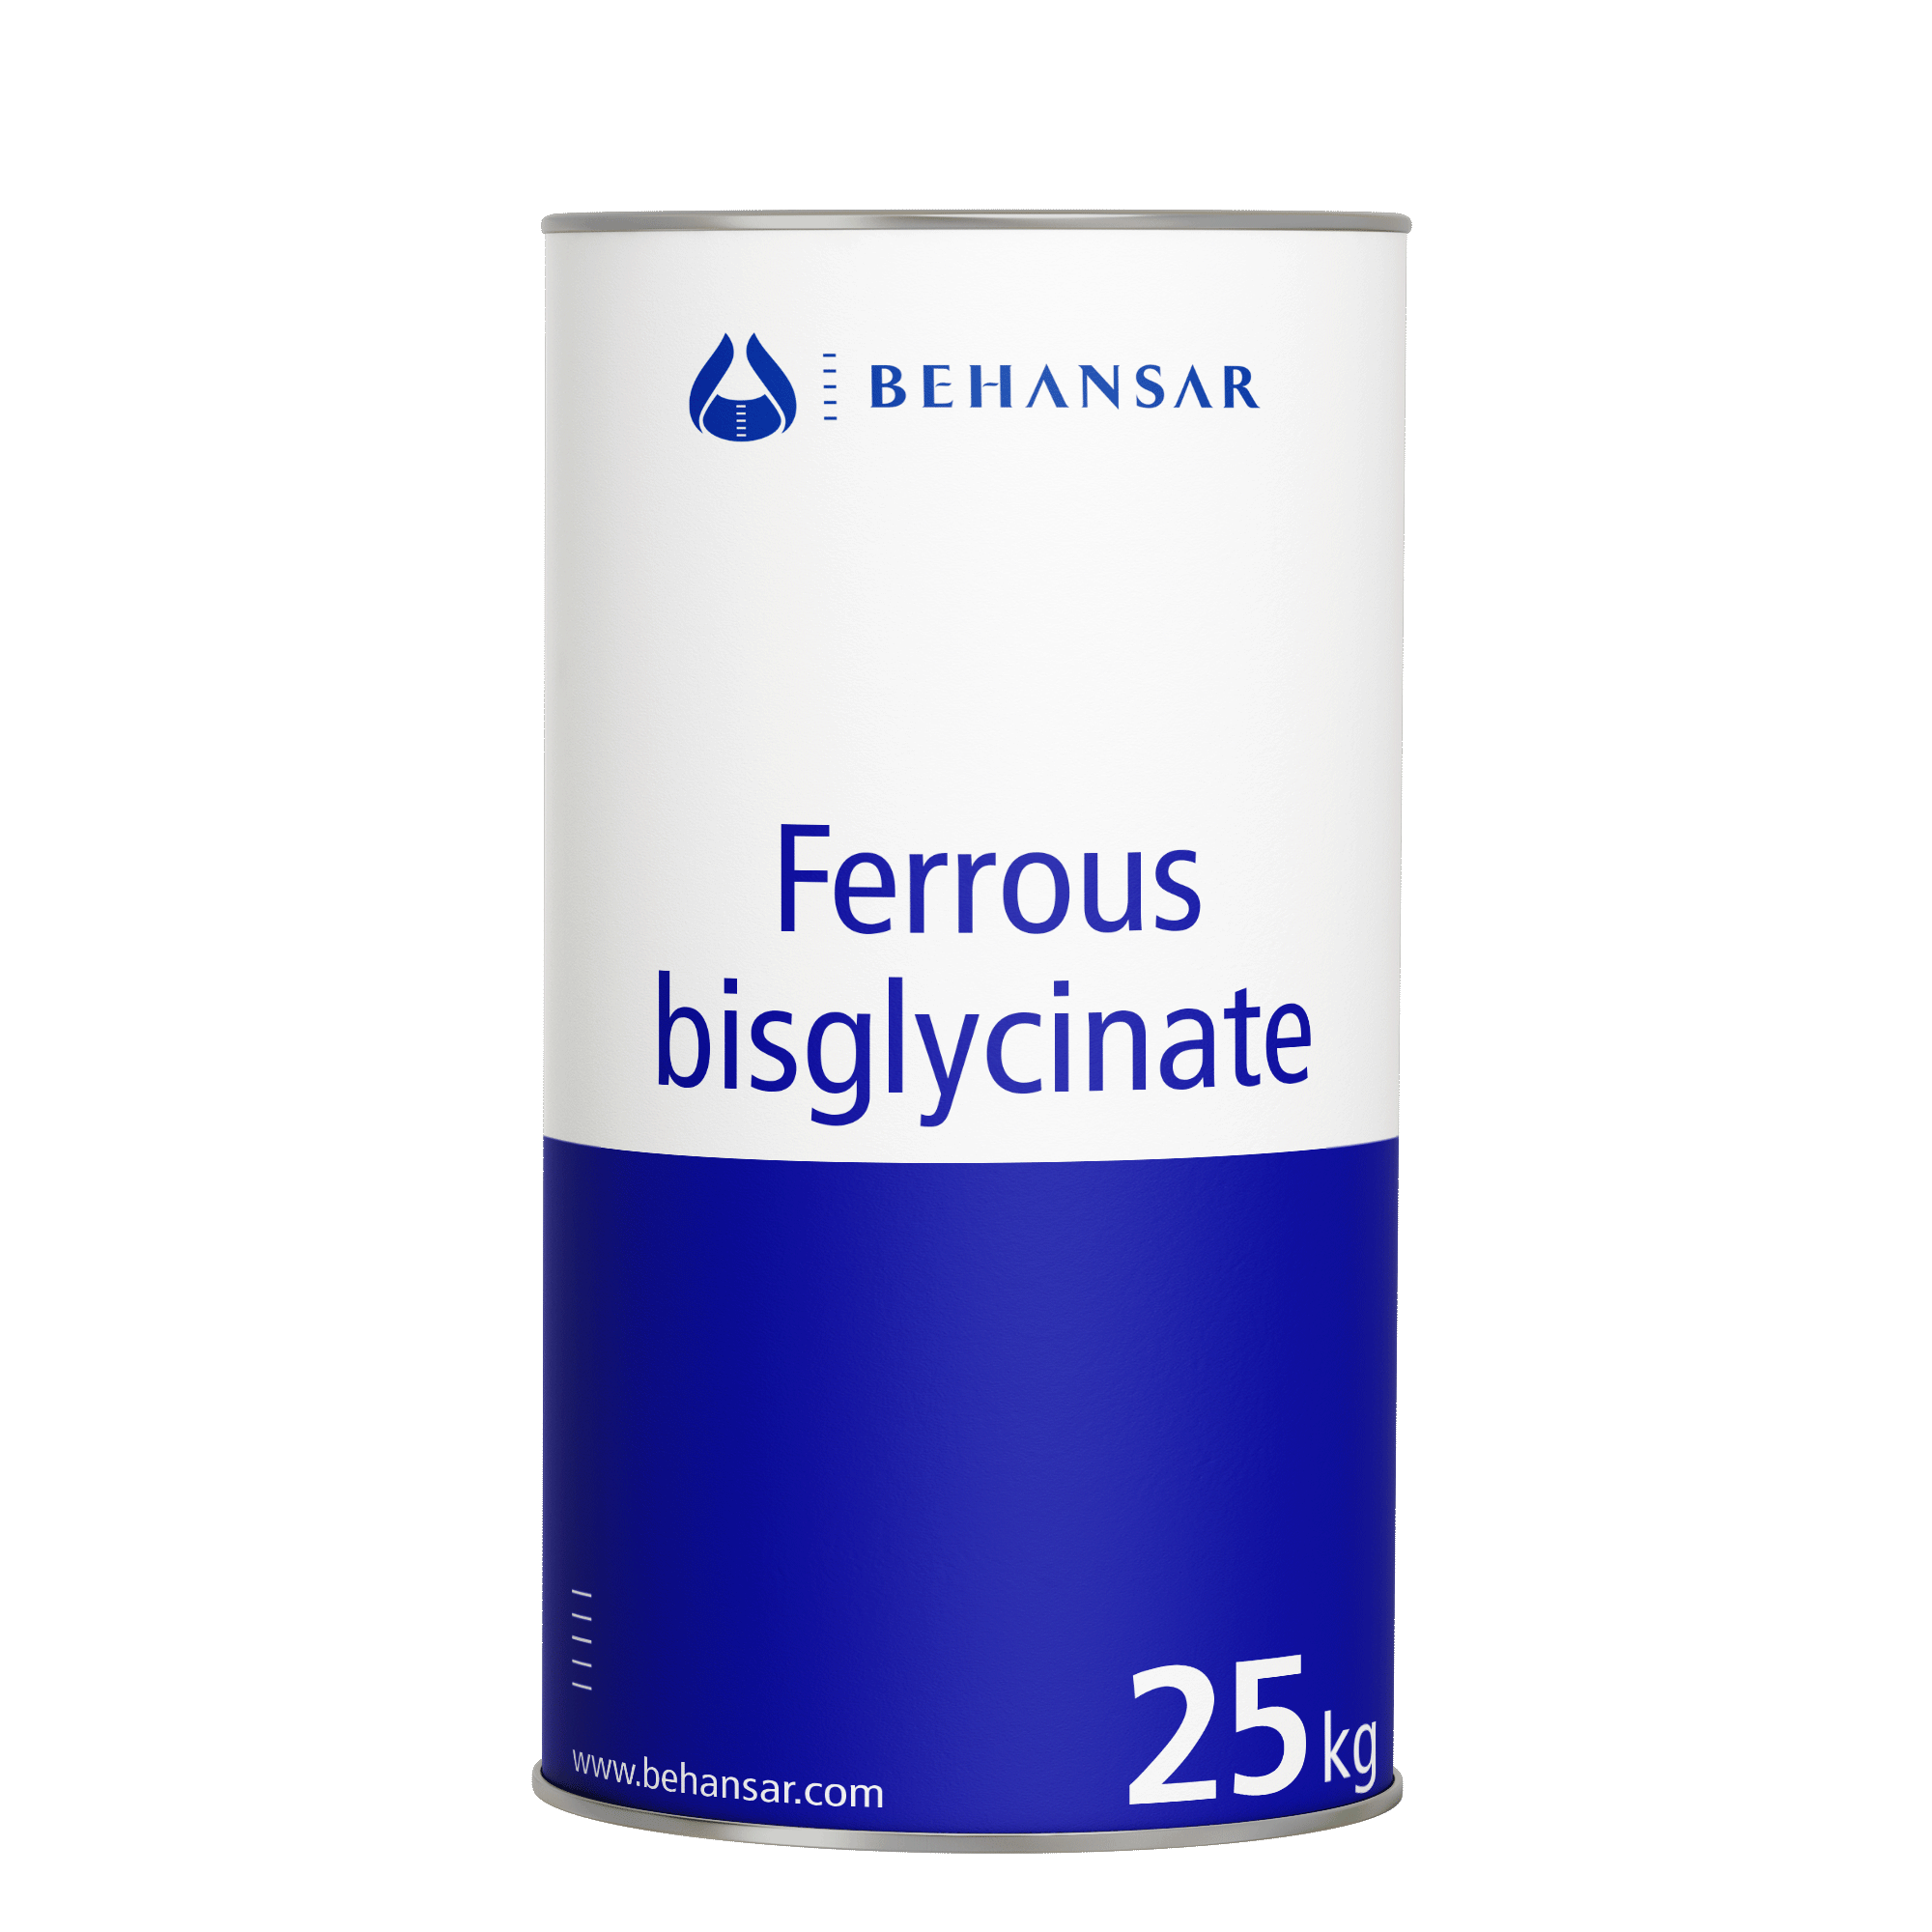 Ferrous bisglycinate is one of the products of Behansar Co